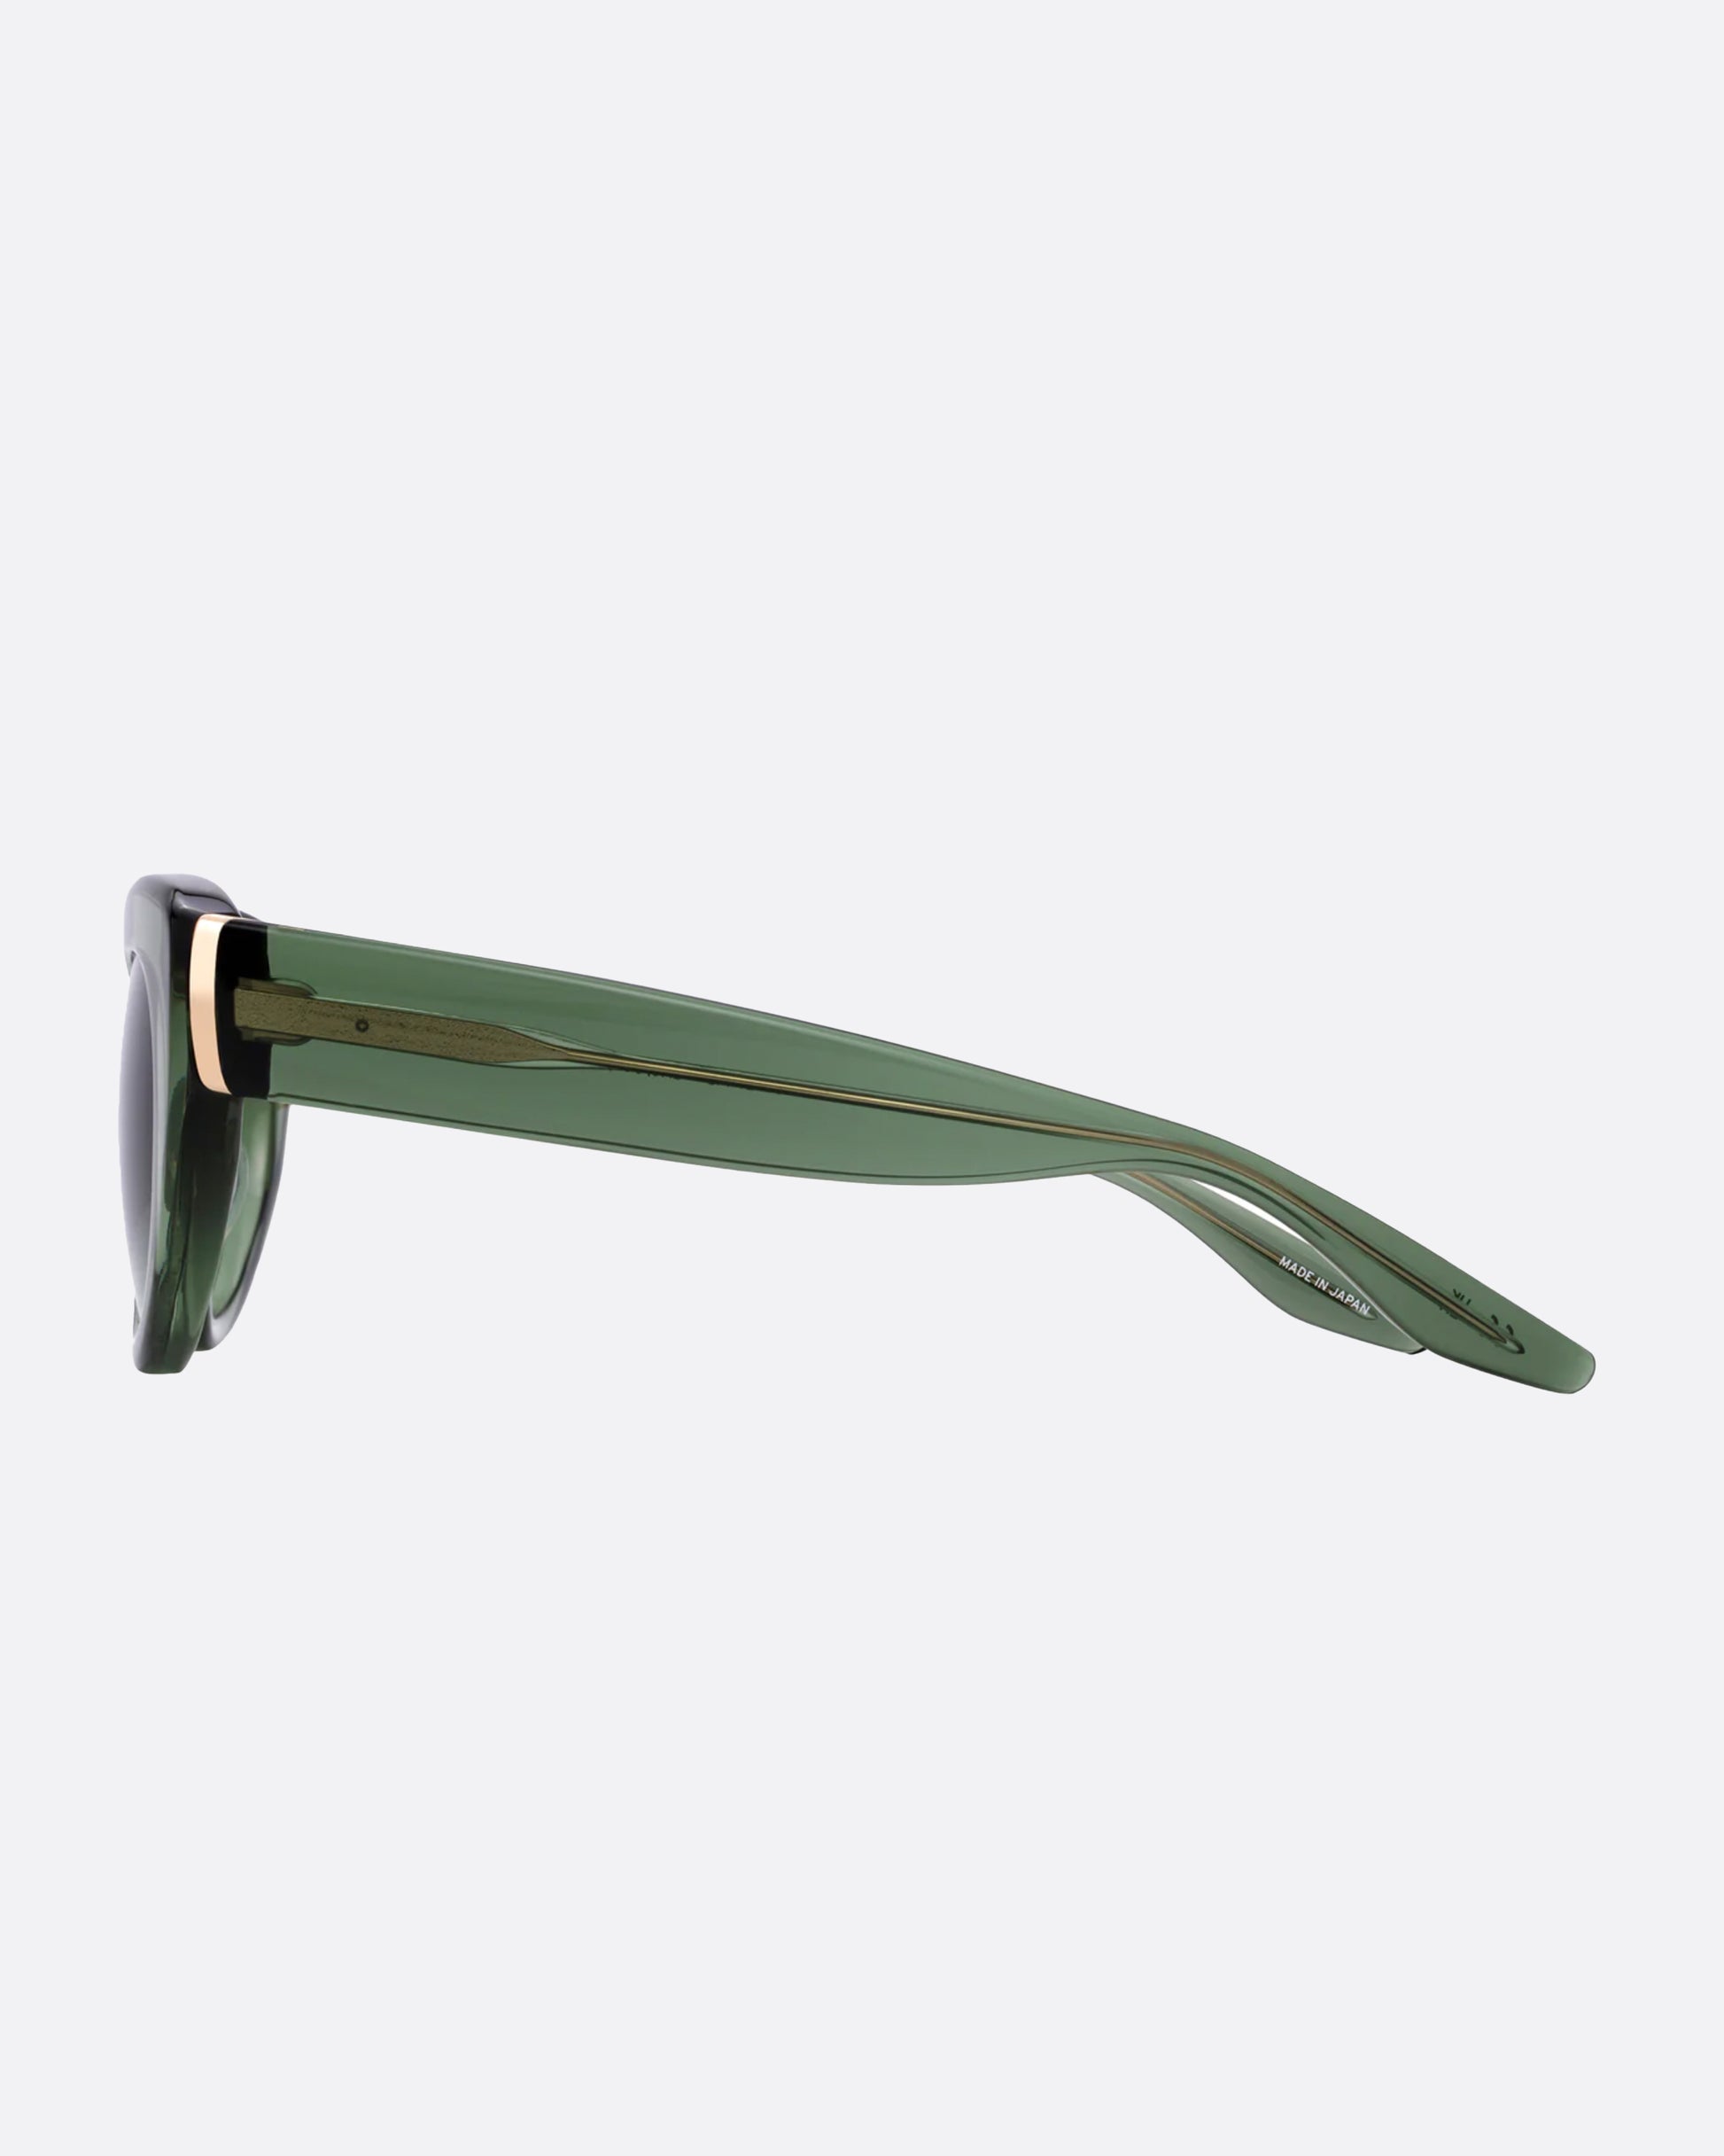 A playful cat-eye silhouette with 24k gold plated titanium details, this time in a transparent sage green with matching gradient lenses.